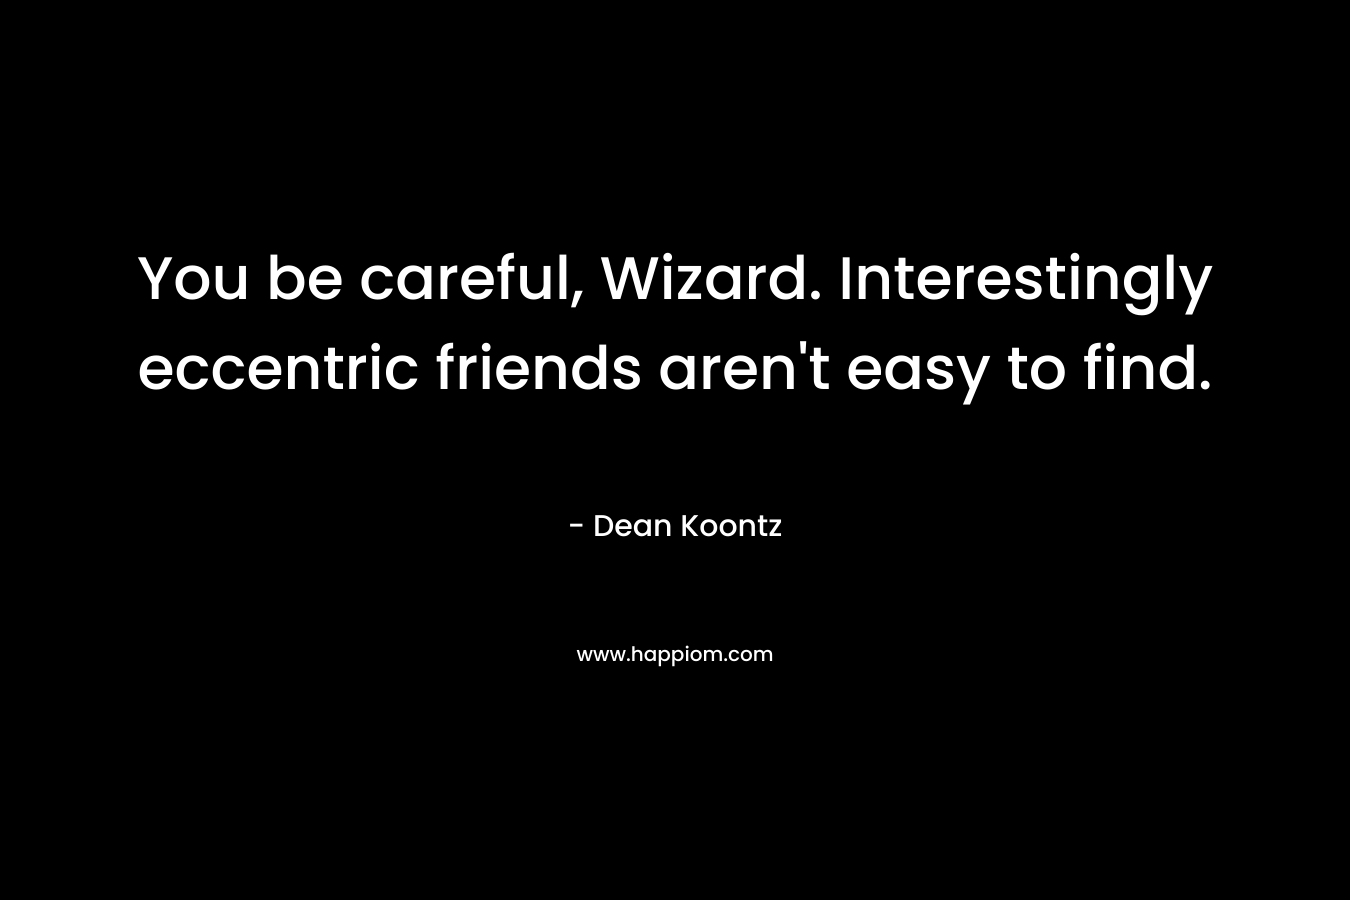 You be careful, Wizard. Interestingly eccentric friends aren’t easy to find. – Dean Koontz